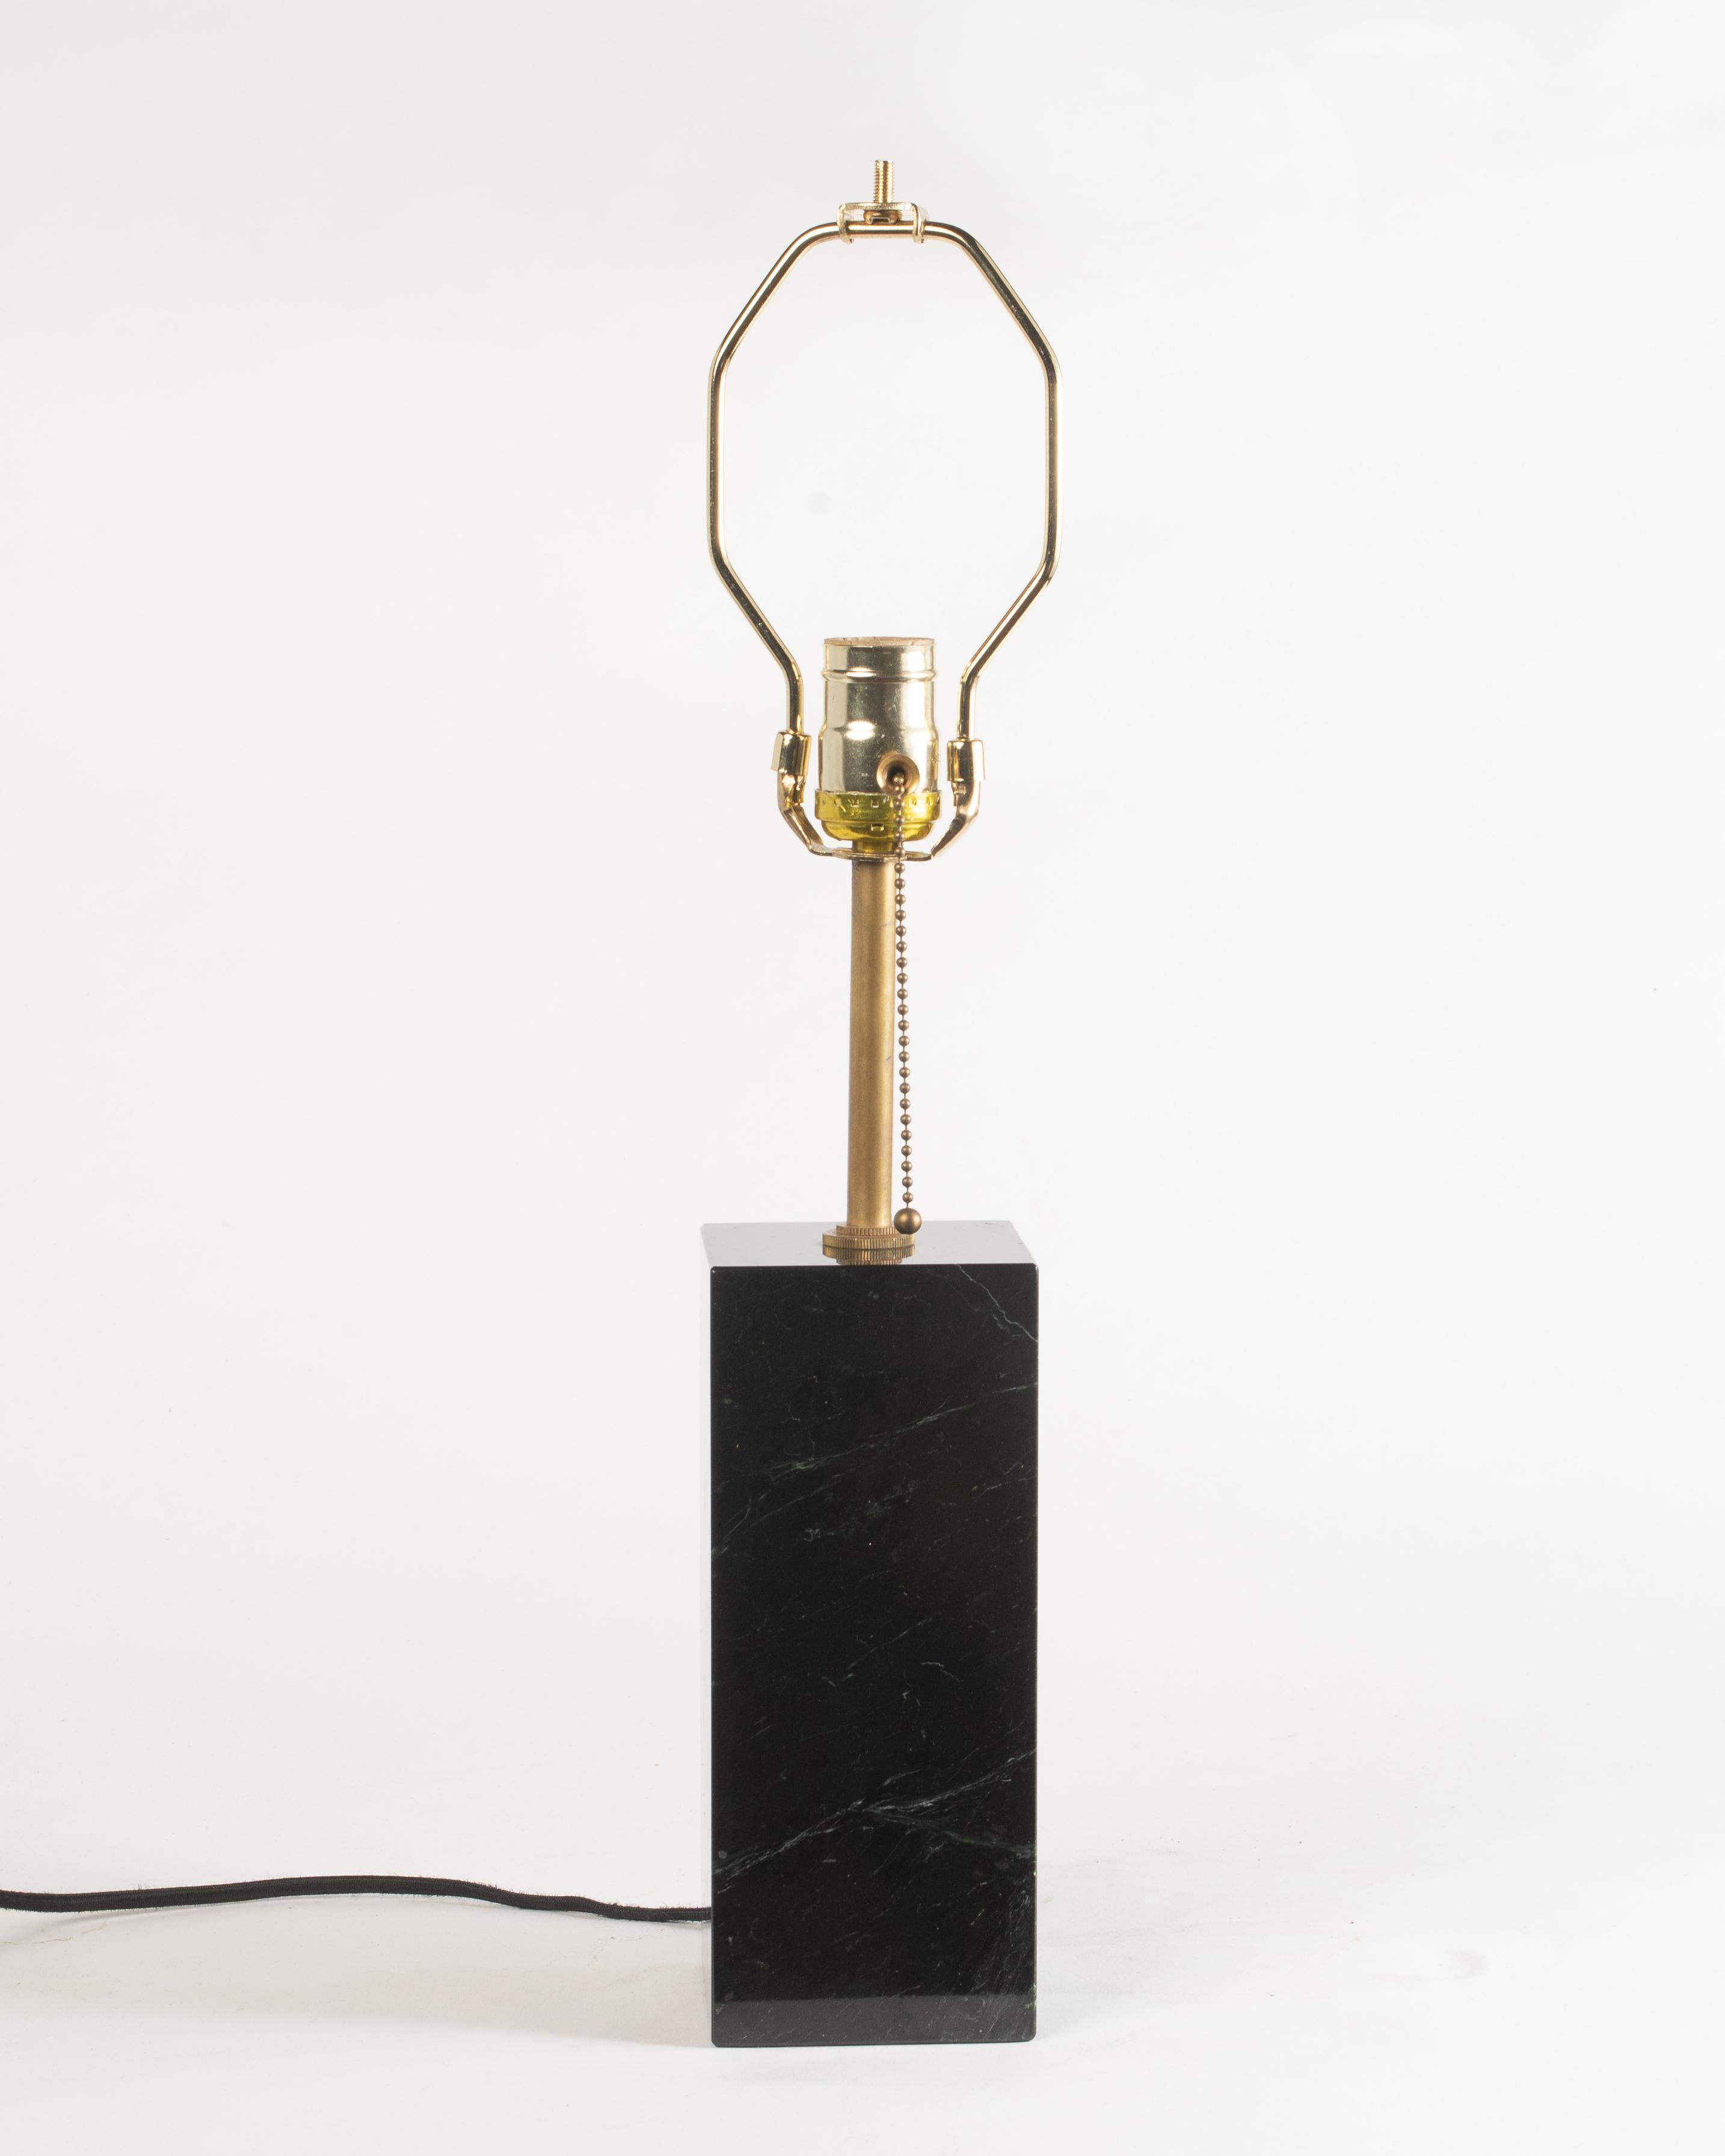 A wonderful petite table lamp after T.H. Robsjohn-Gibbings for Hansen, New York. Well-chosen piece of black marble with faint white and green veining. Dimensions: 15